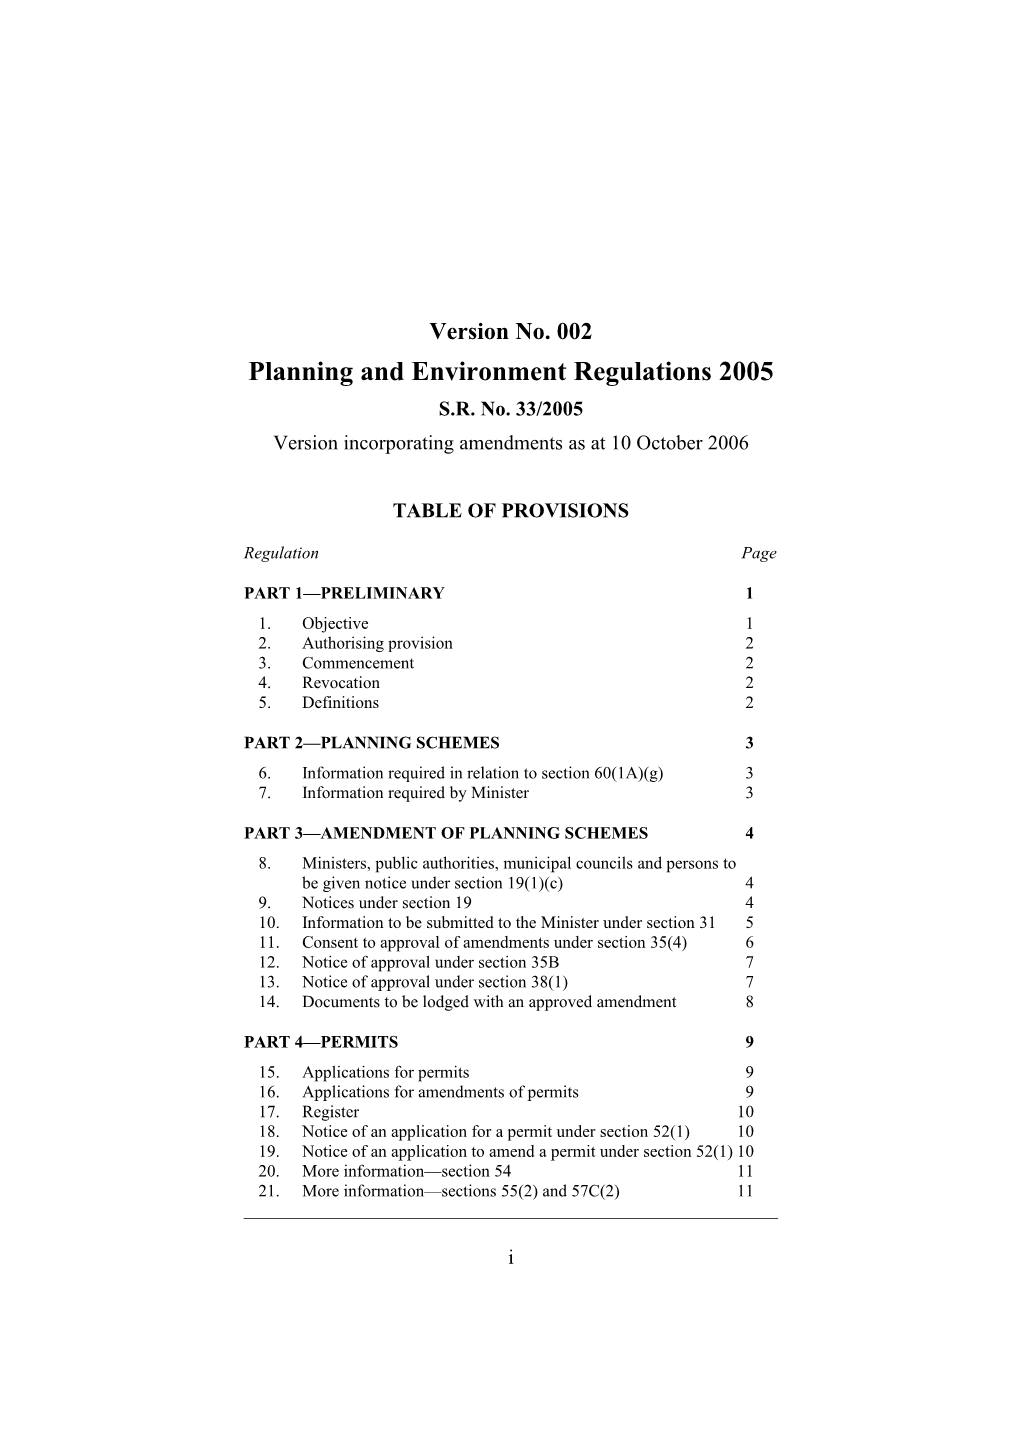 Planning and Environment Regulations 2005